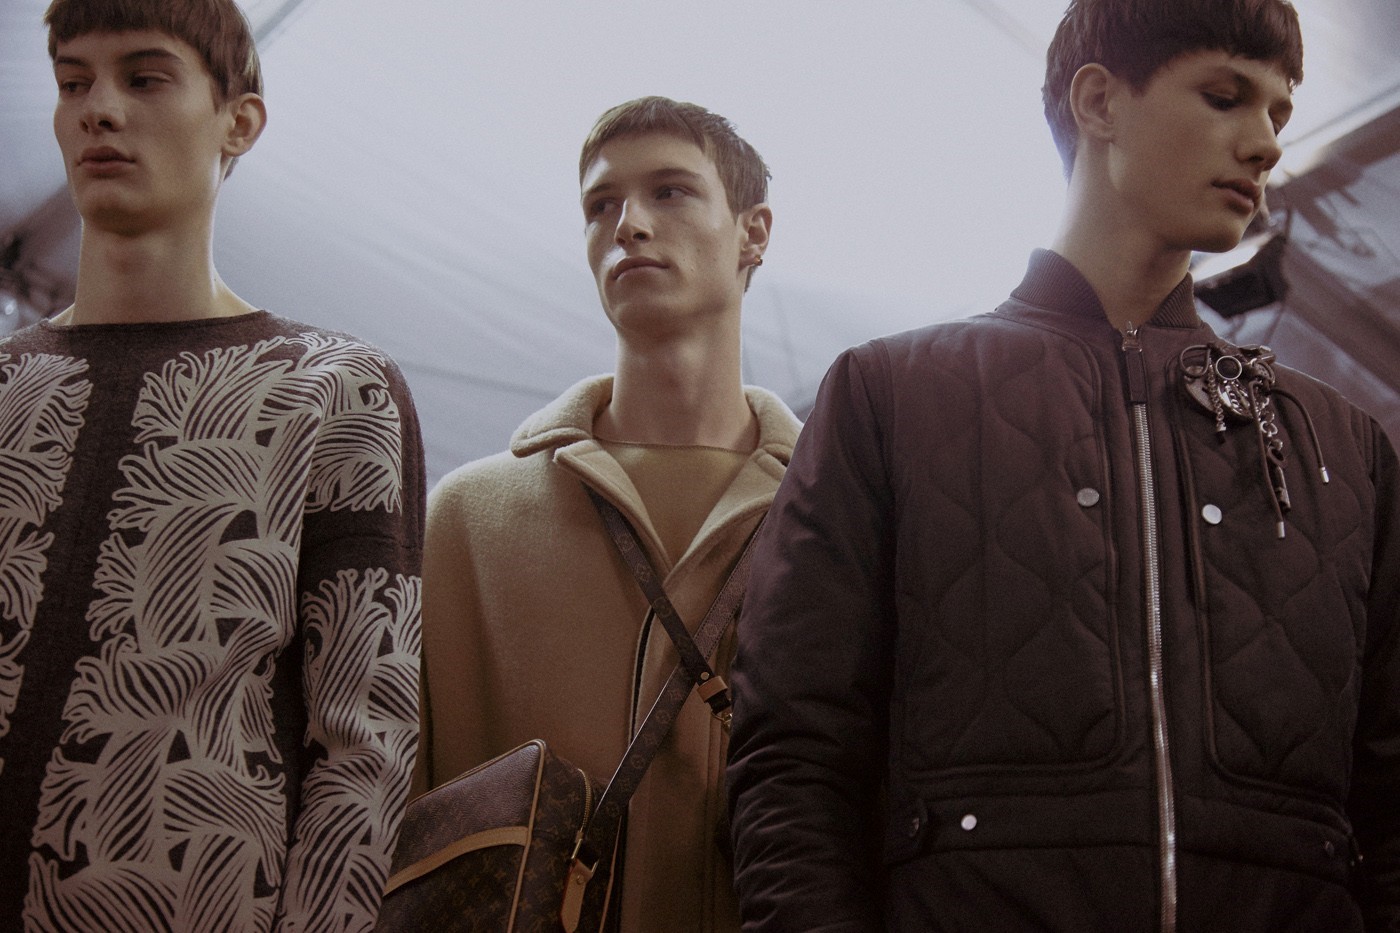 Louis Vuitton - Scenes from backstage at the Louis Vuitton Men's